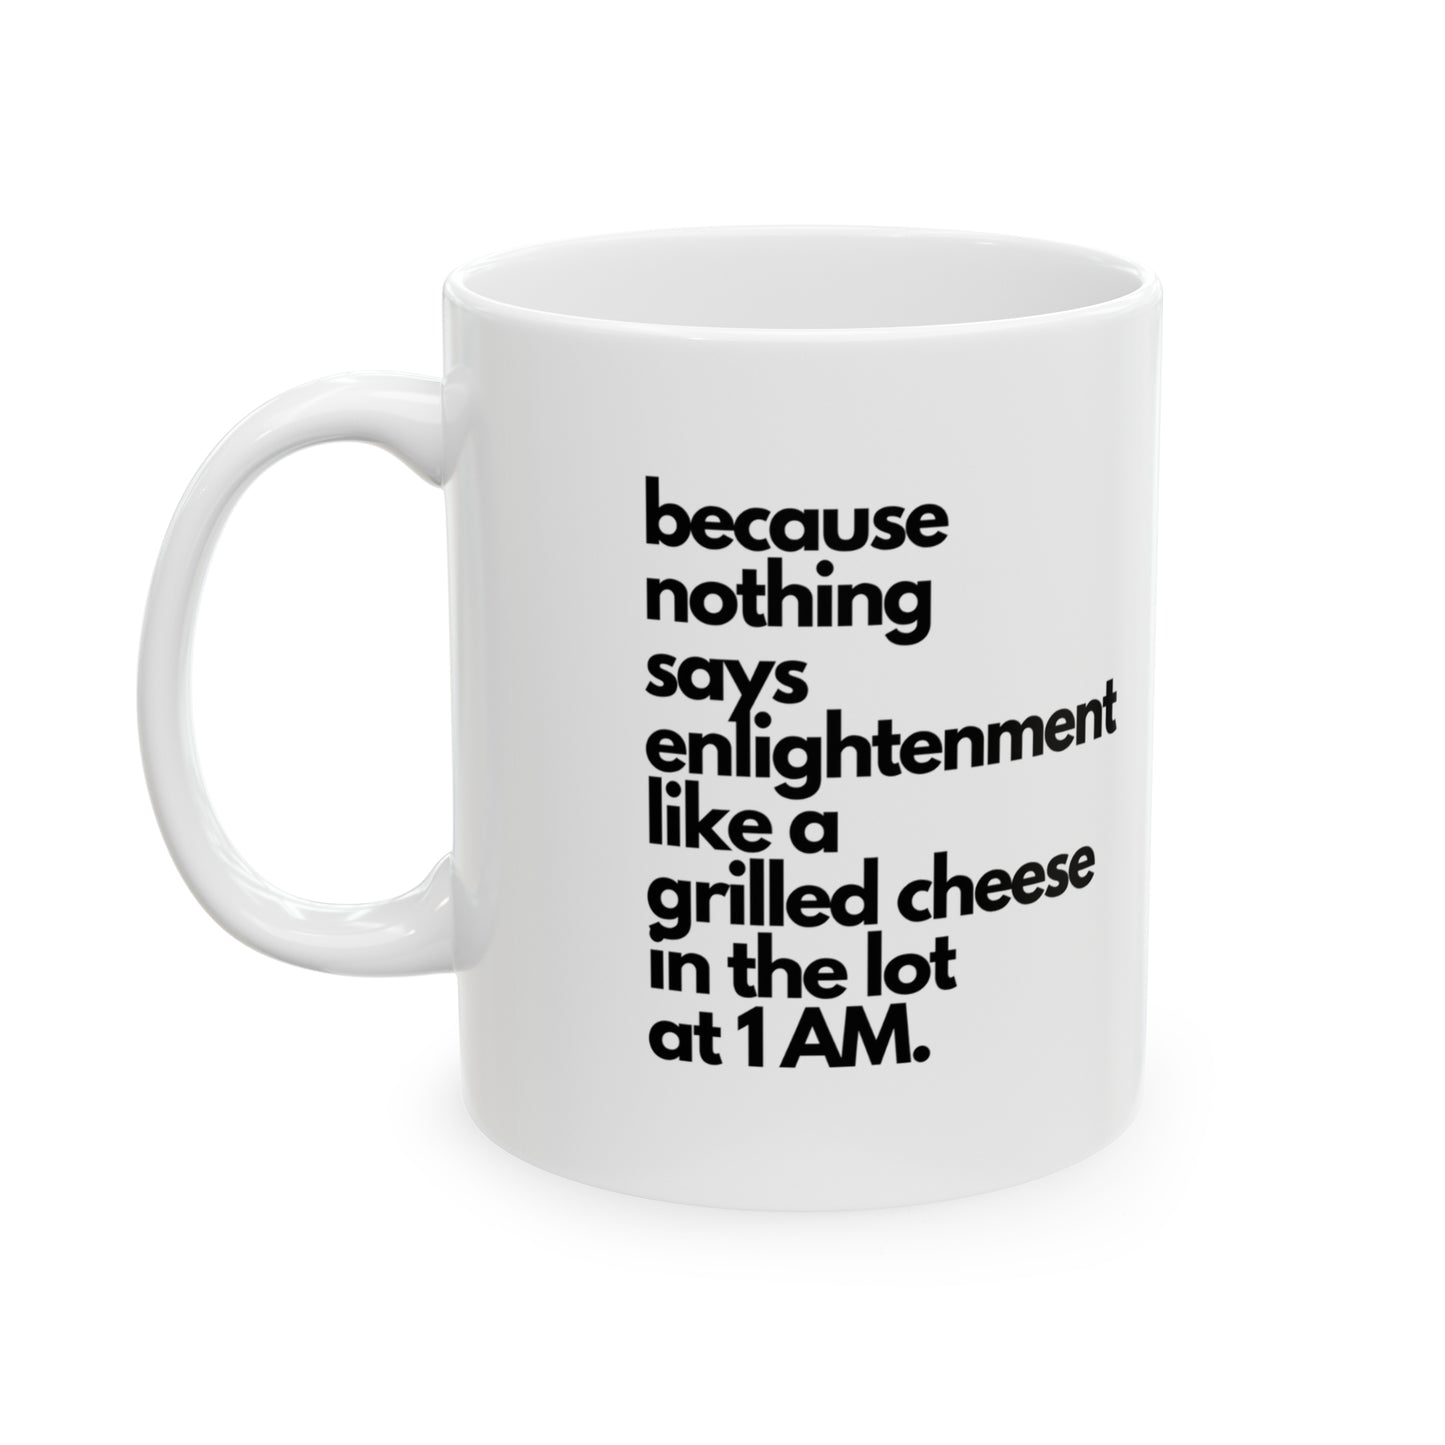 Because Nothing Says Enlightenment Like A Grilled Cheese In The Lot At 1AM Ceramic Mug, 11oz